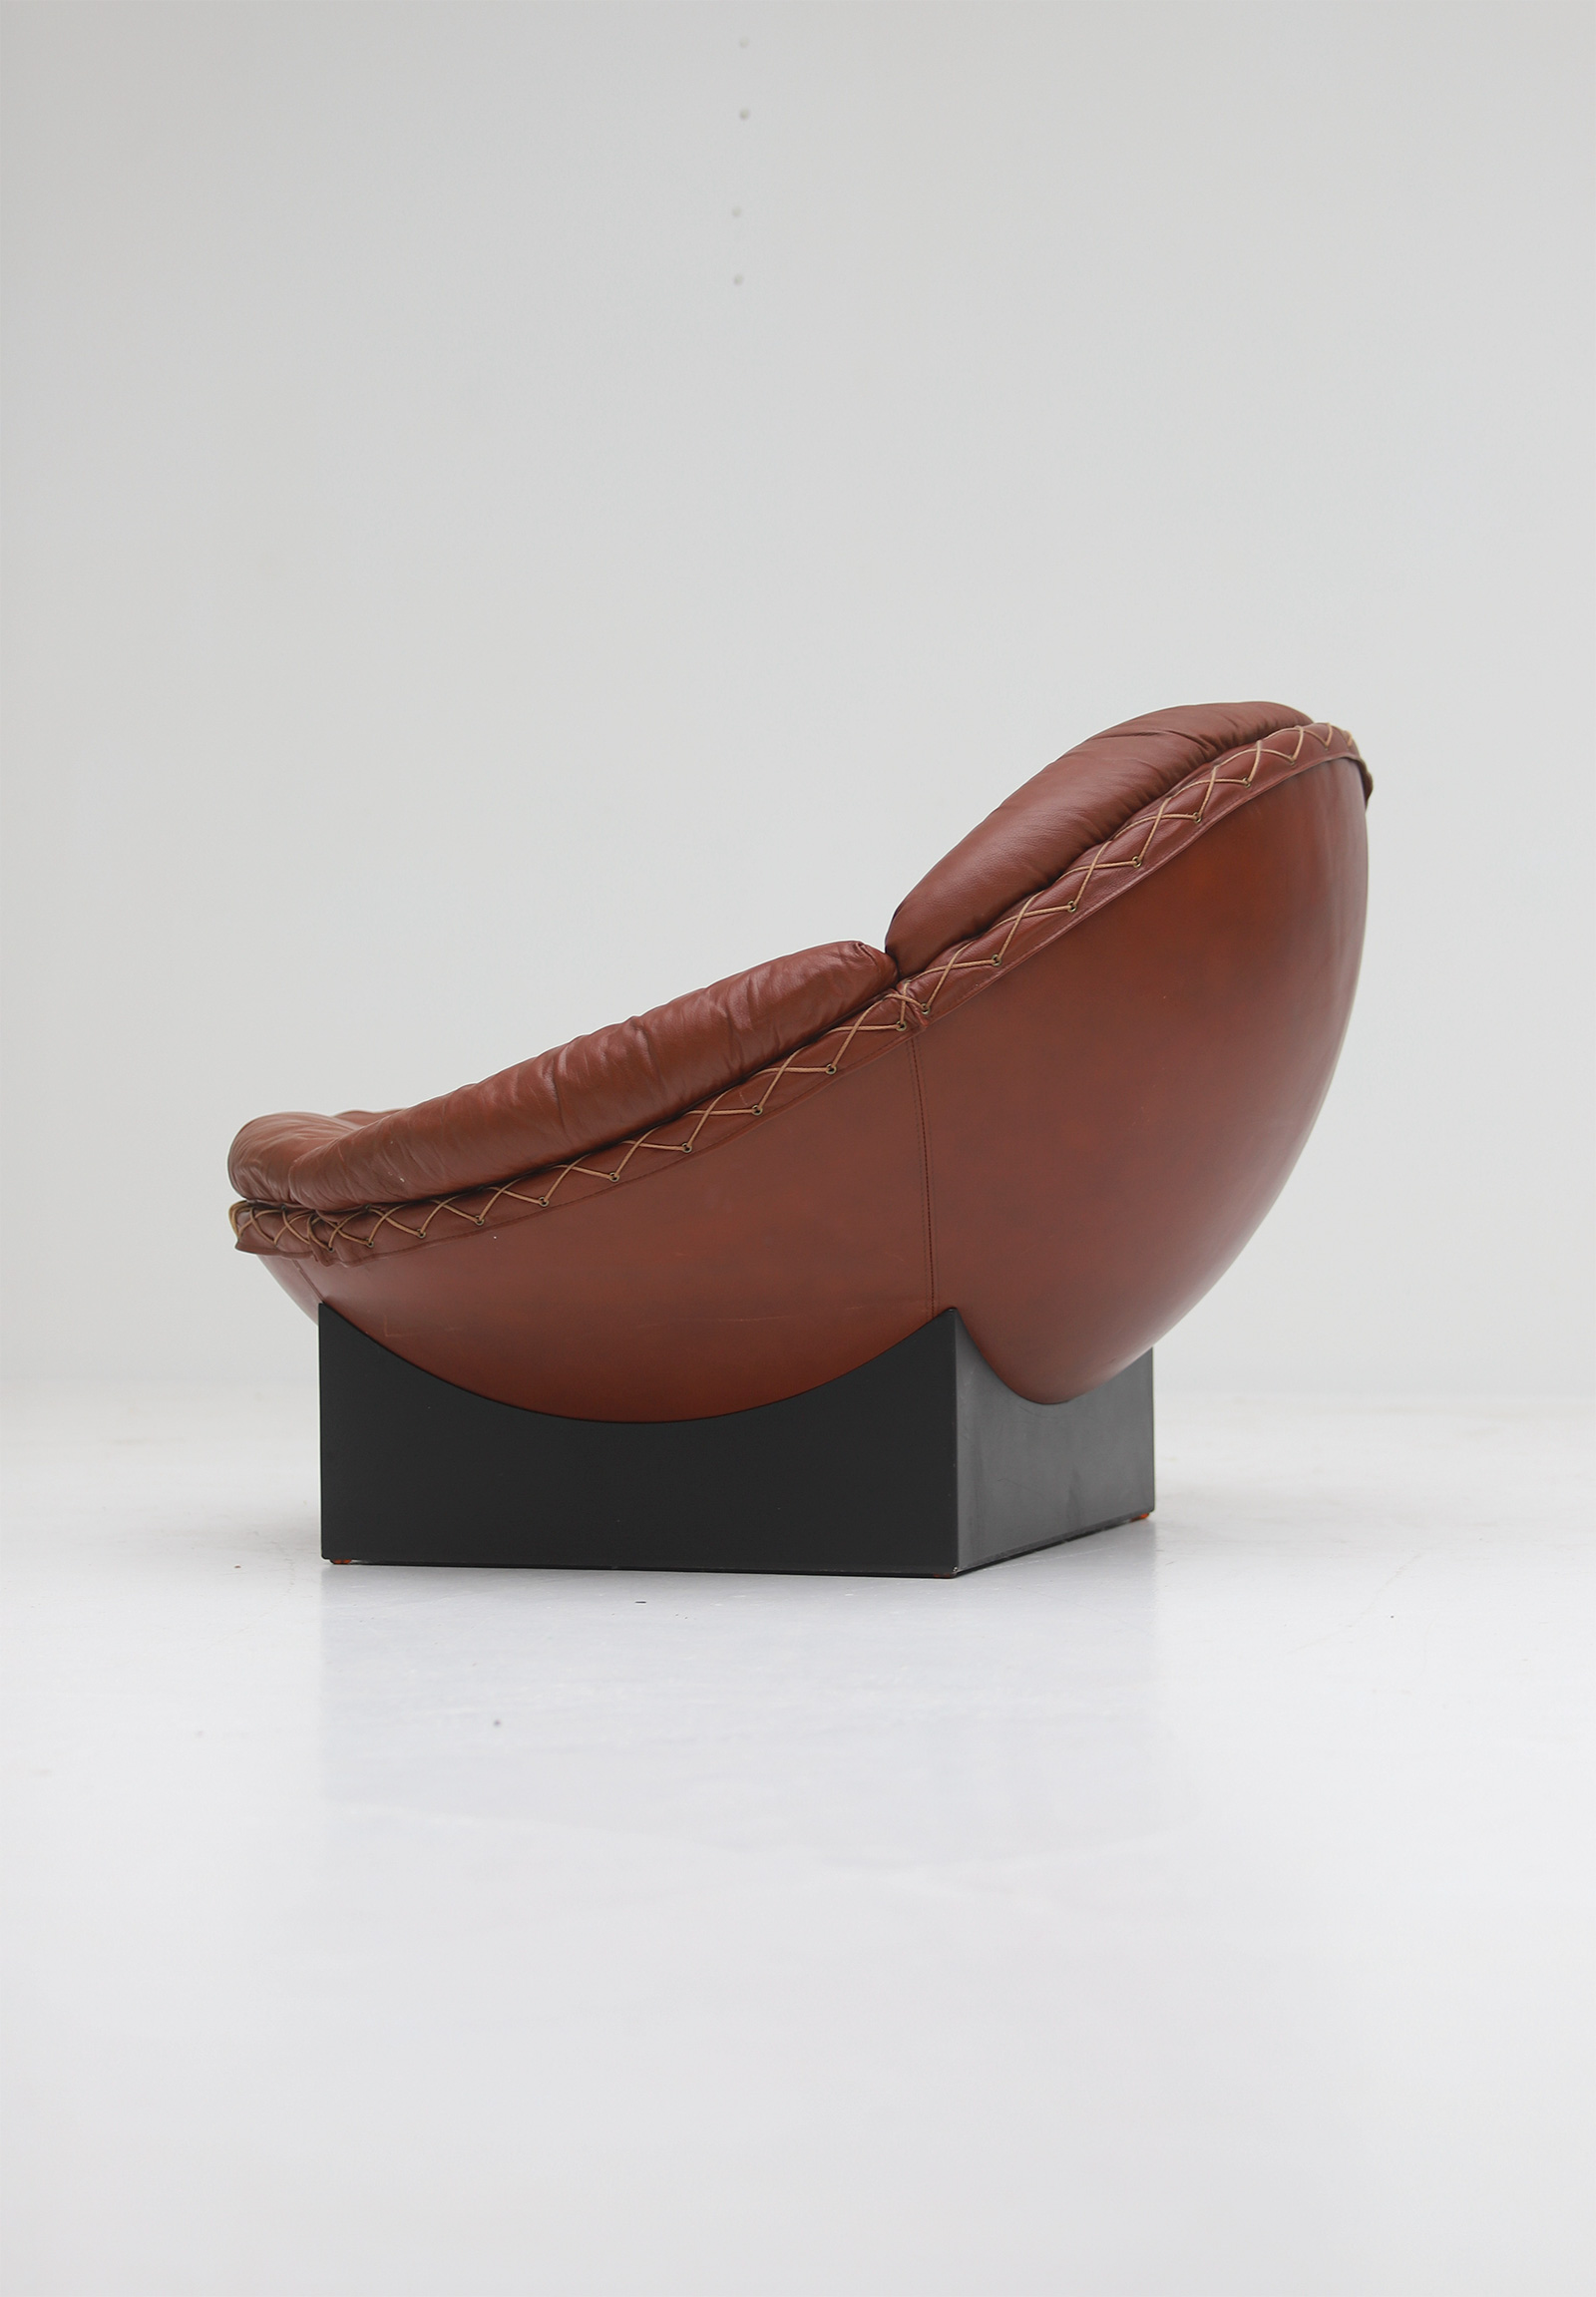 Leather Lounge Chairs by Illum Wikkelso for Ryesberg 1970simage 16